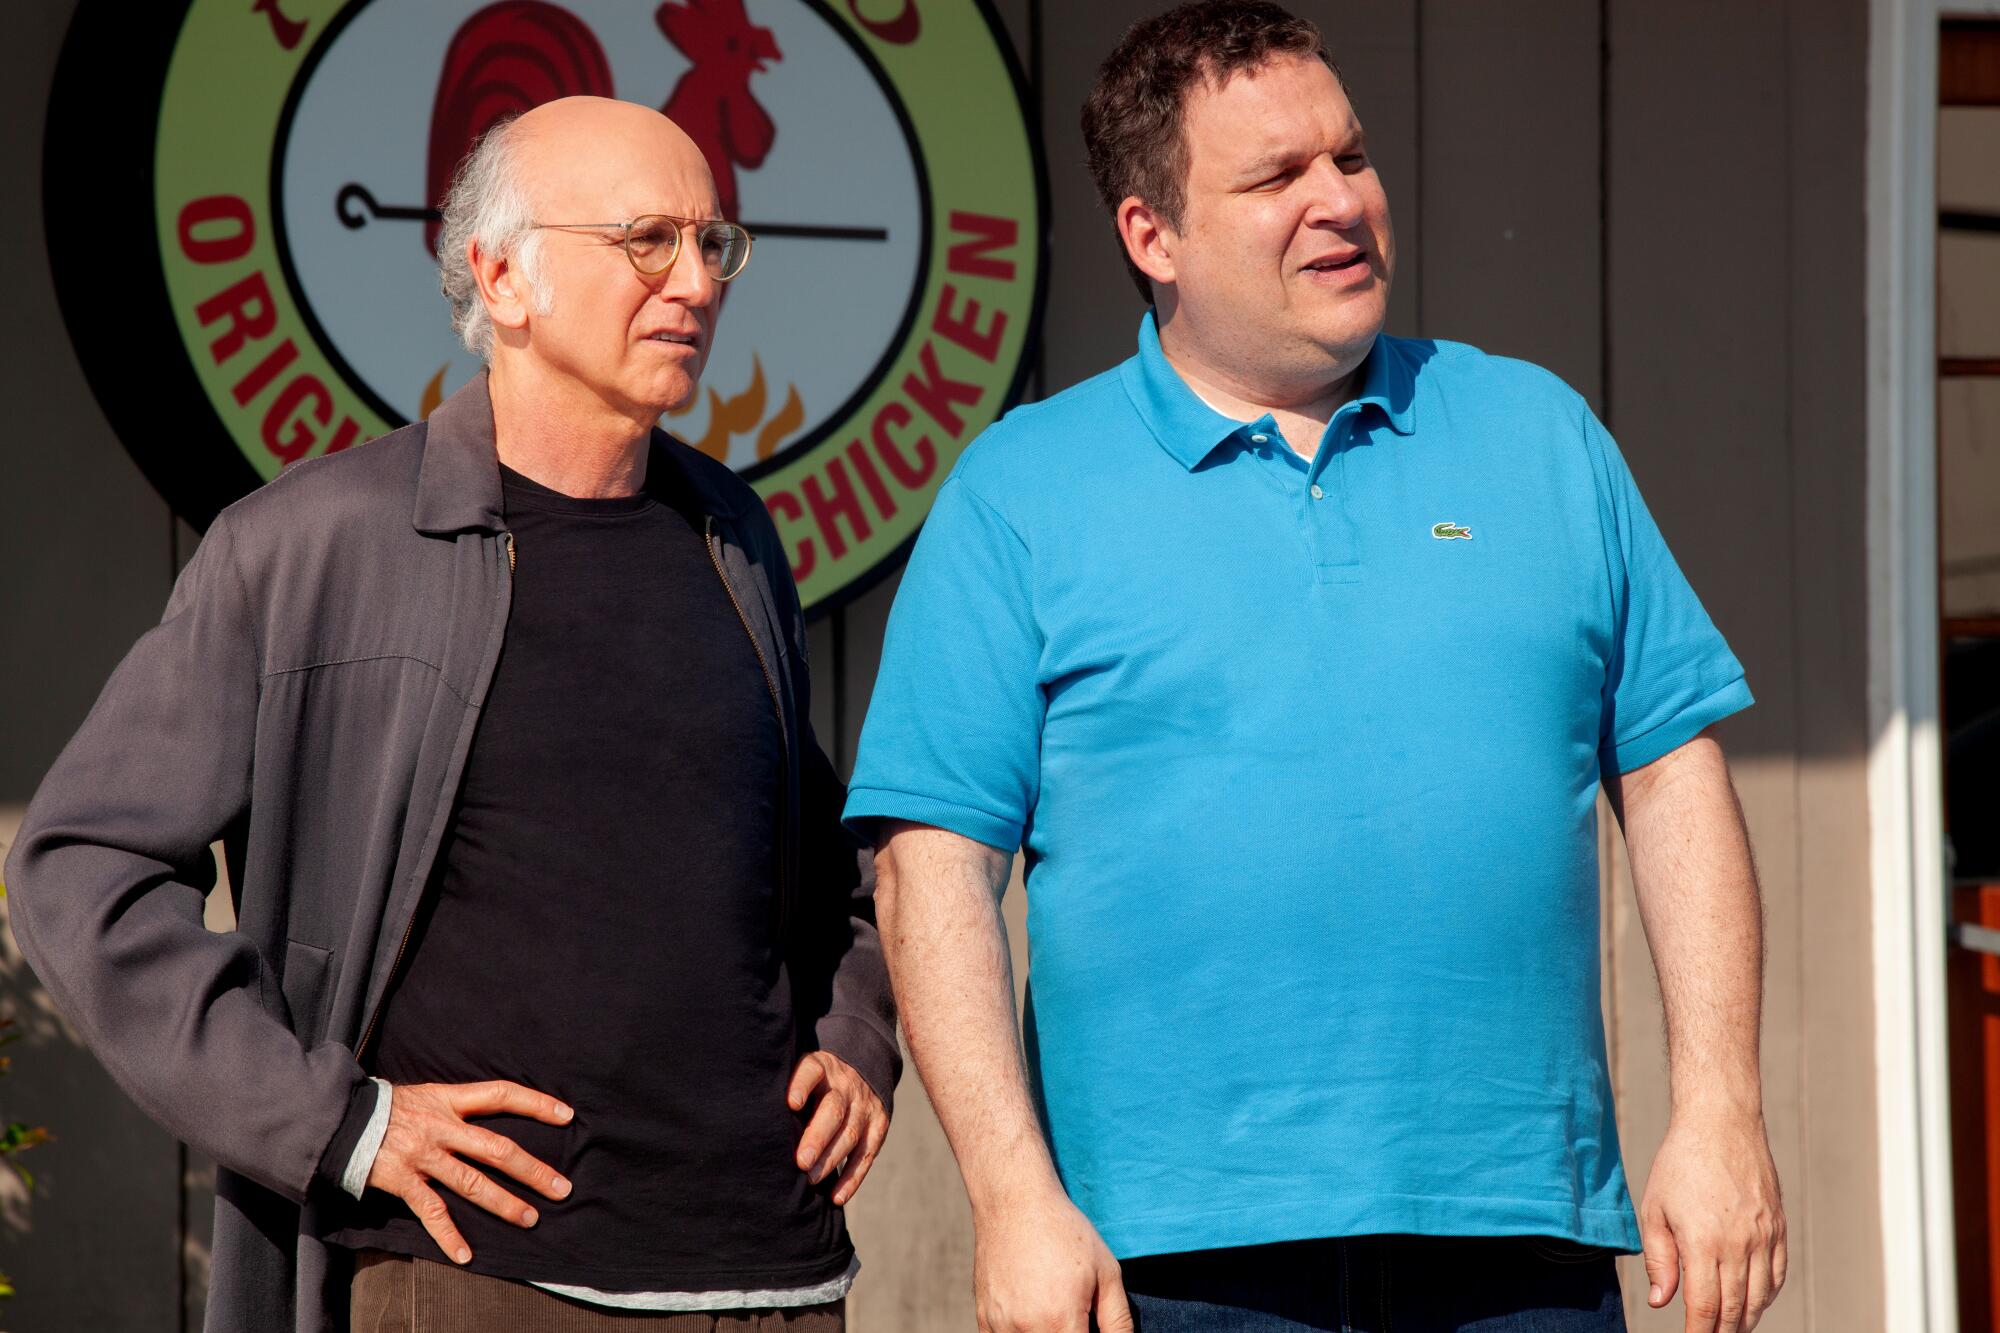 Two men stand outside a chicken restaurant